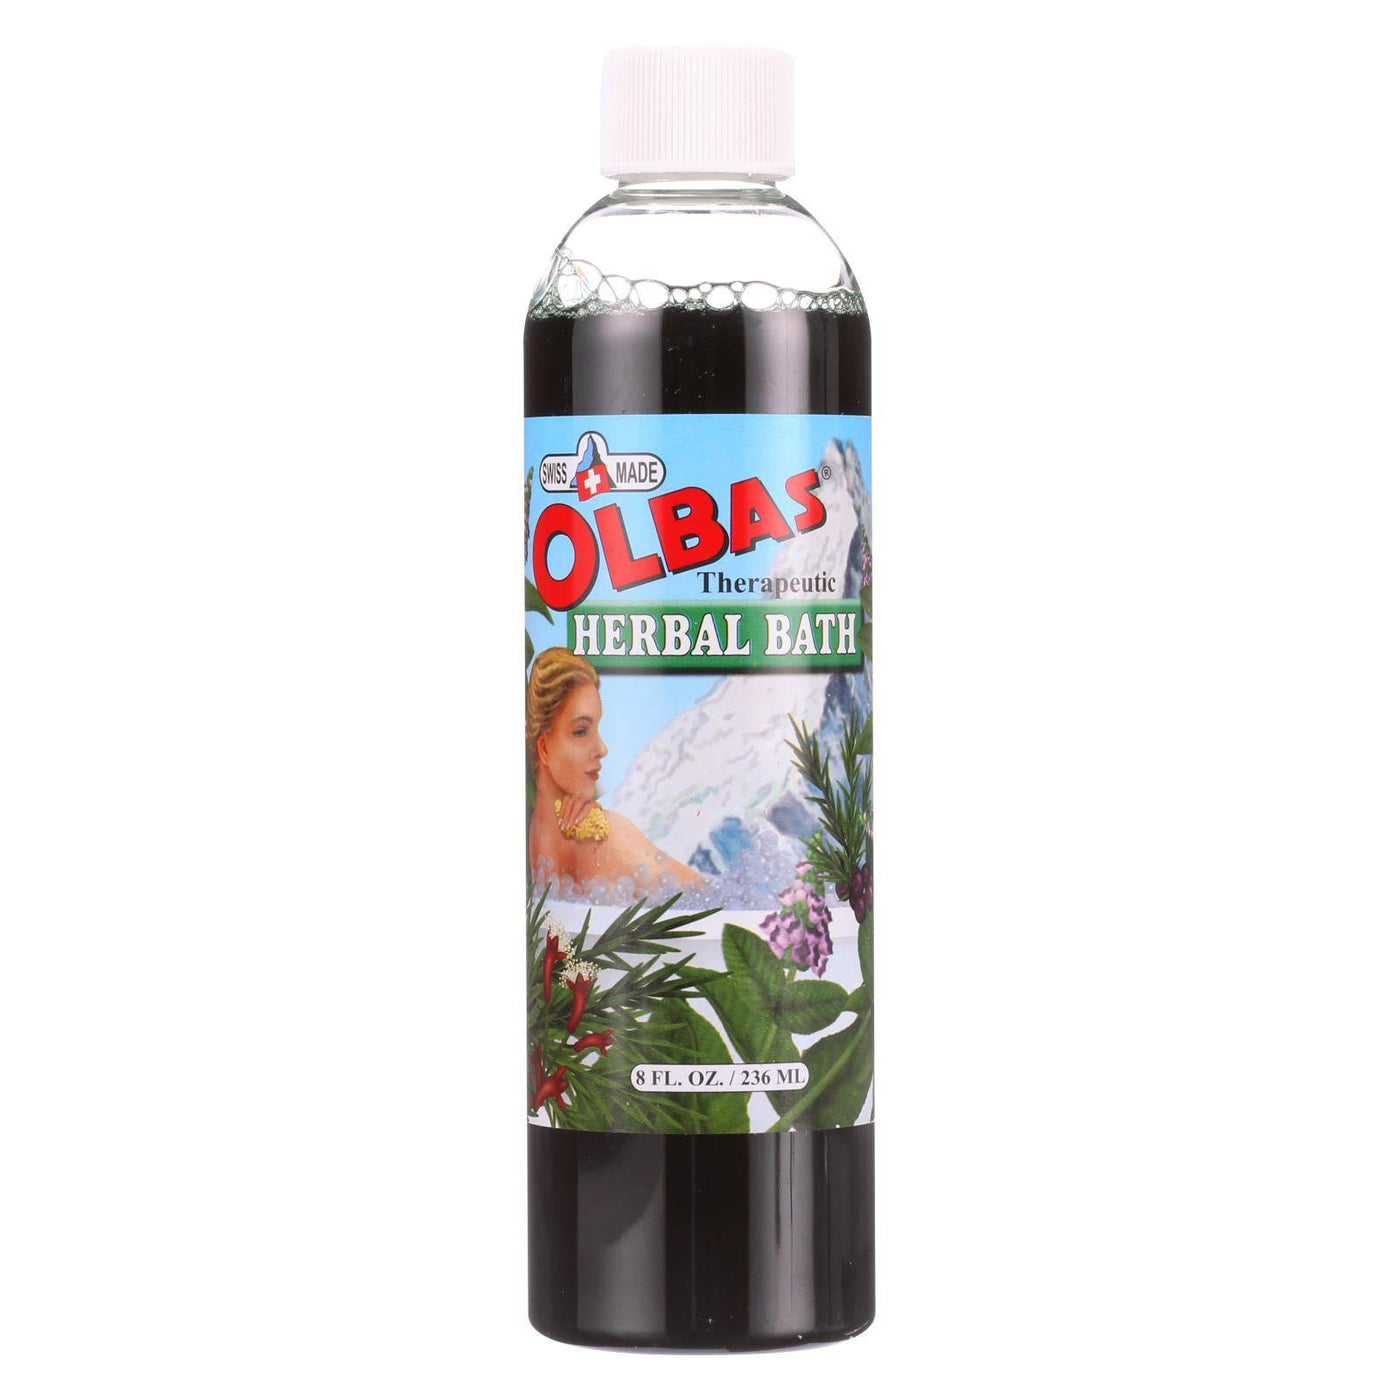 Buy Olbas - Therapeutic Herbal Bath - 8 Fl Oz  at OnlyNaturals.us